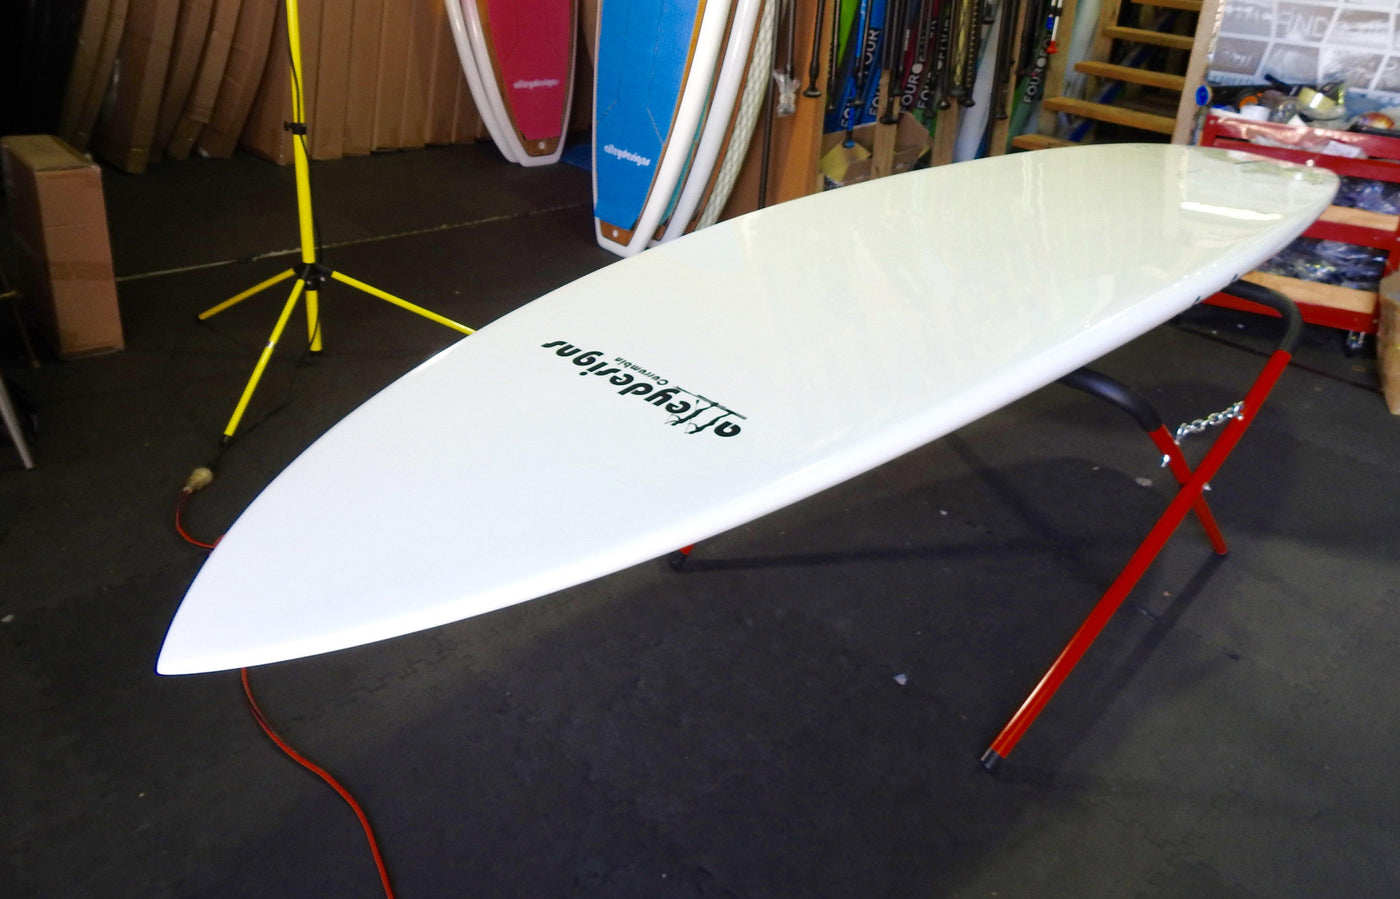 10'6" x 32" Bamboo Deck White Turtle Performance Alleydesigns SUP 11kg - Alleydesigns  Pty Ltd                                             ABN: 44165571264